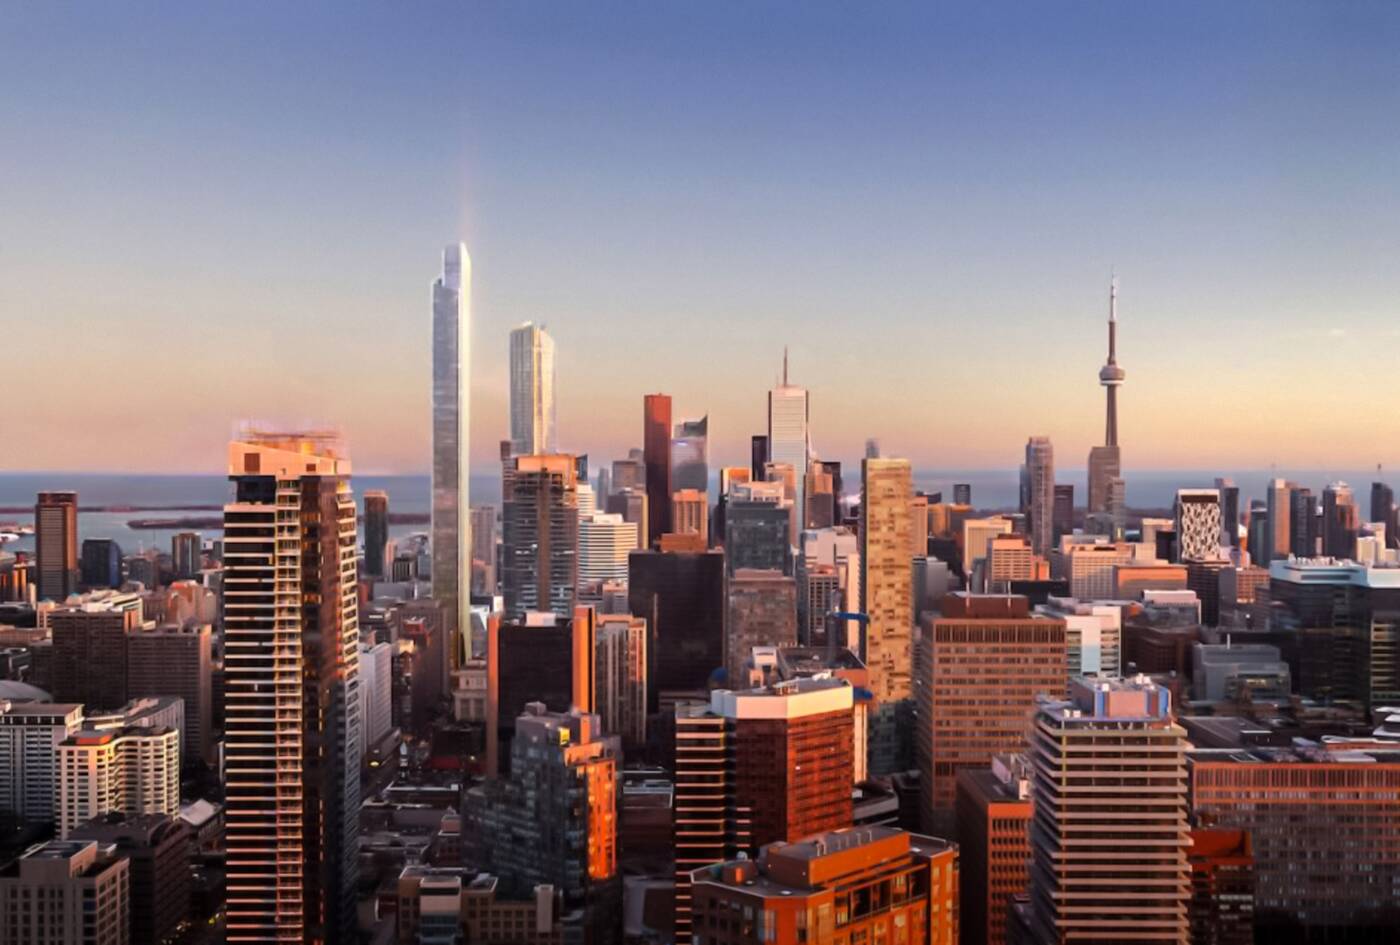 These Tall Skyscrapers Could Be Coming To Toronto Soon